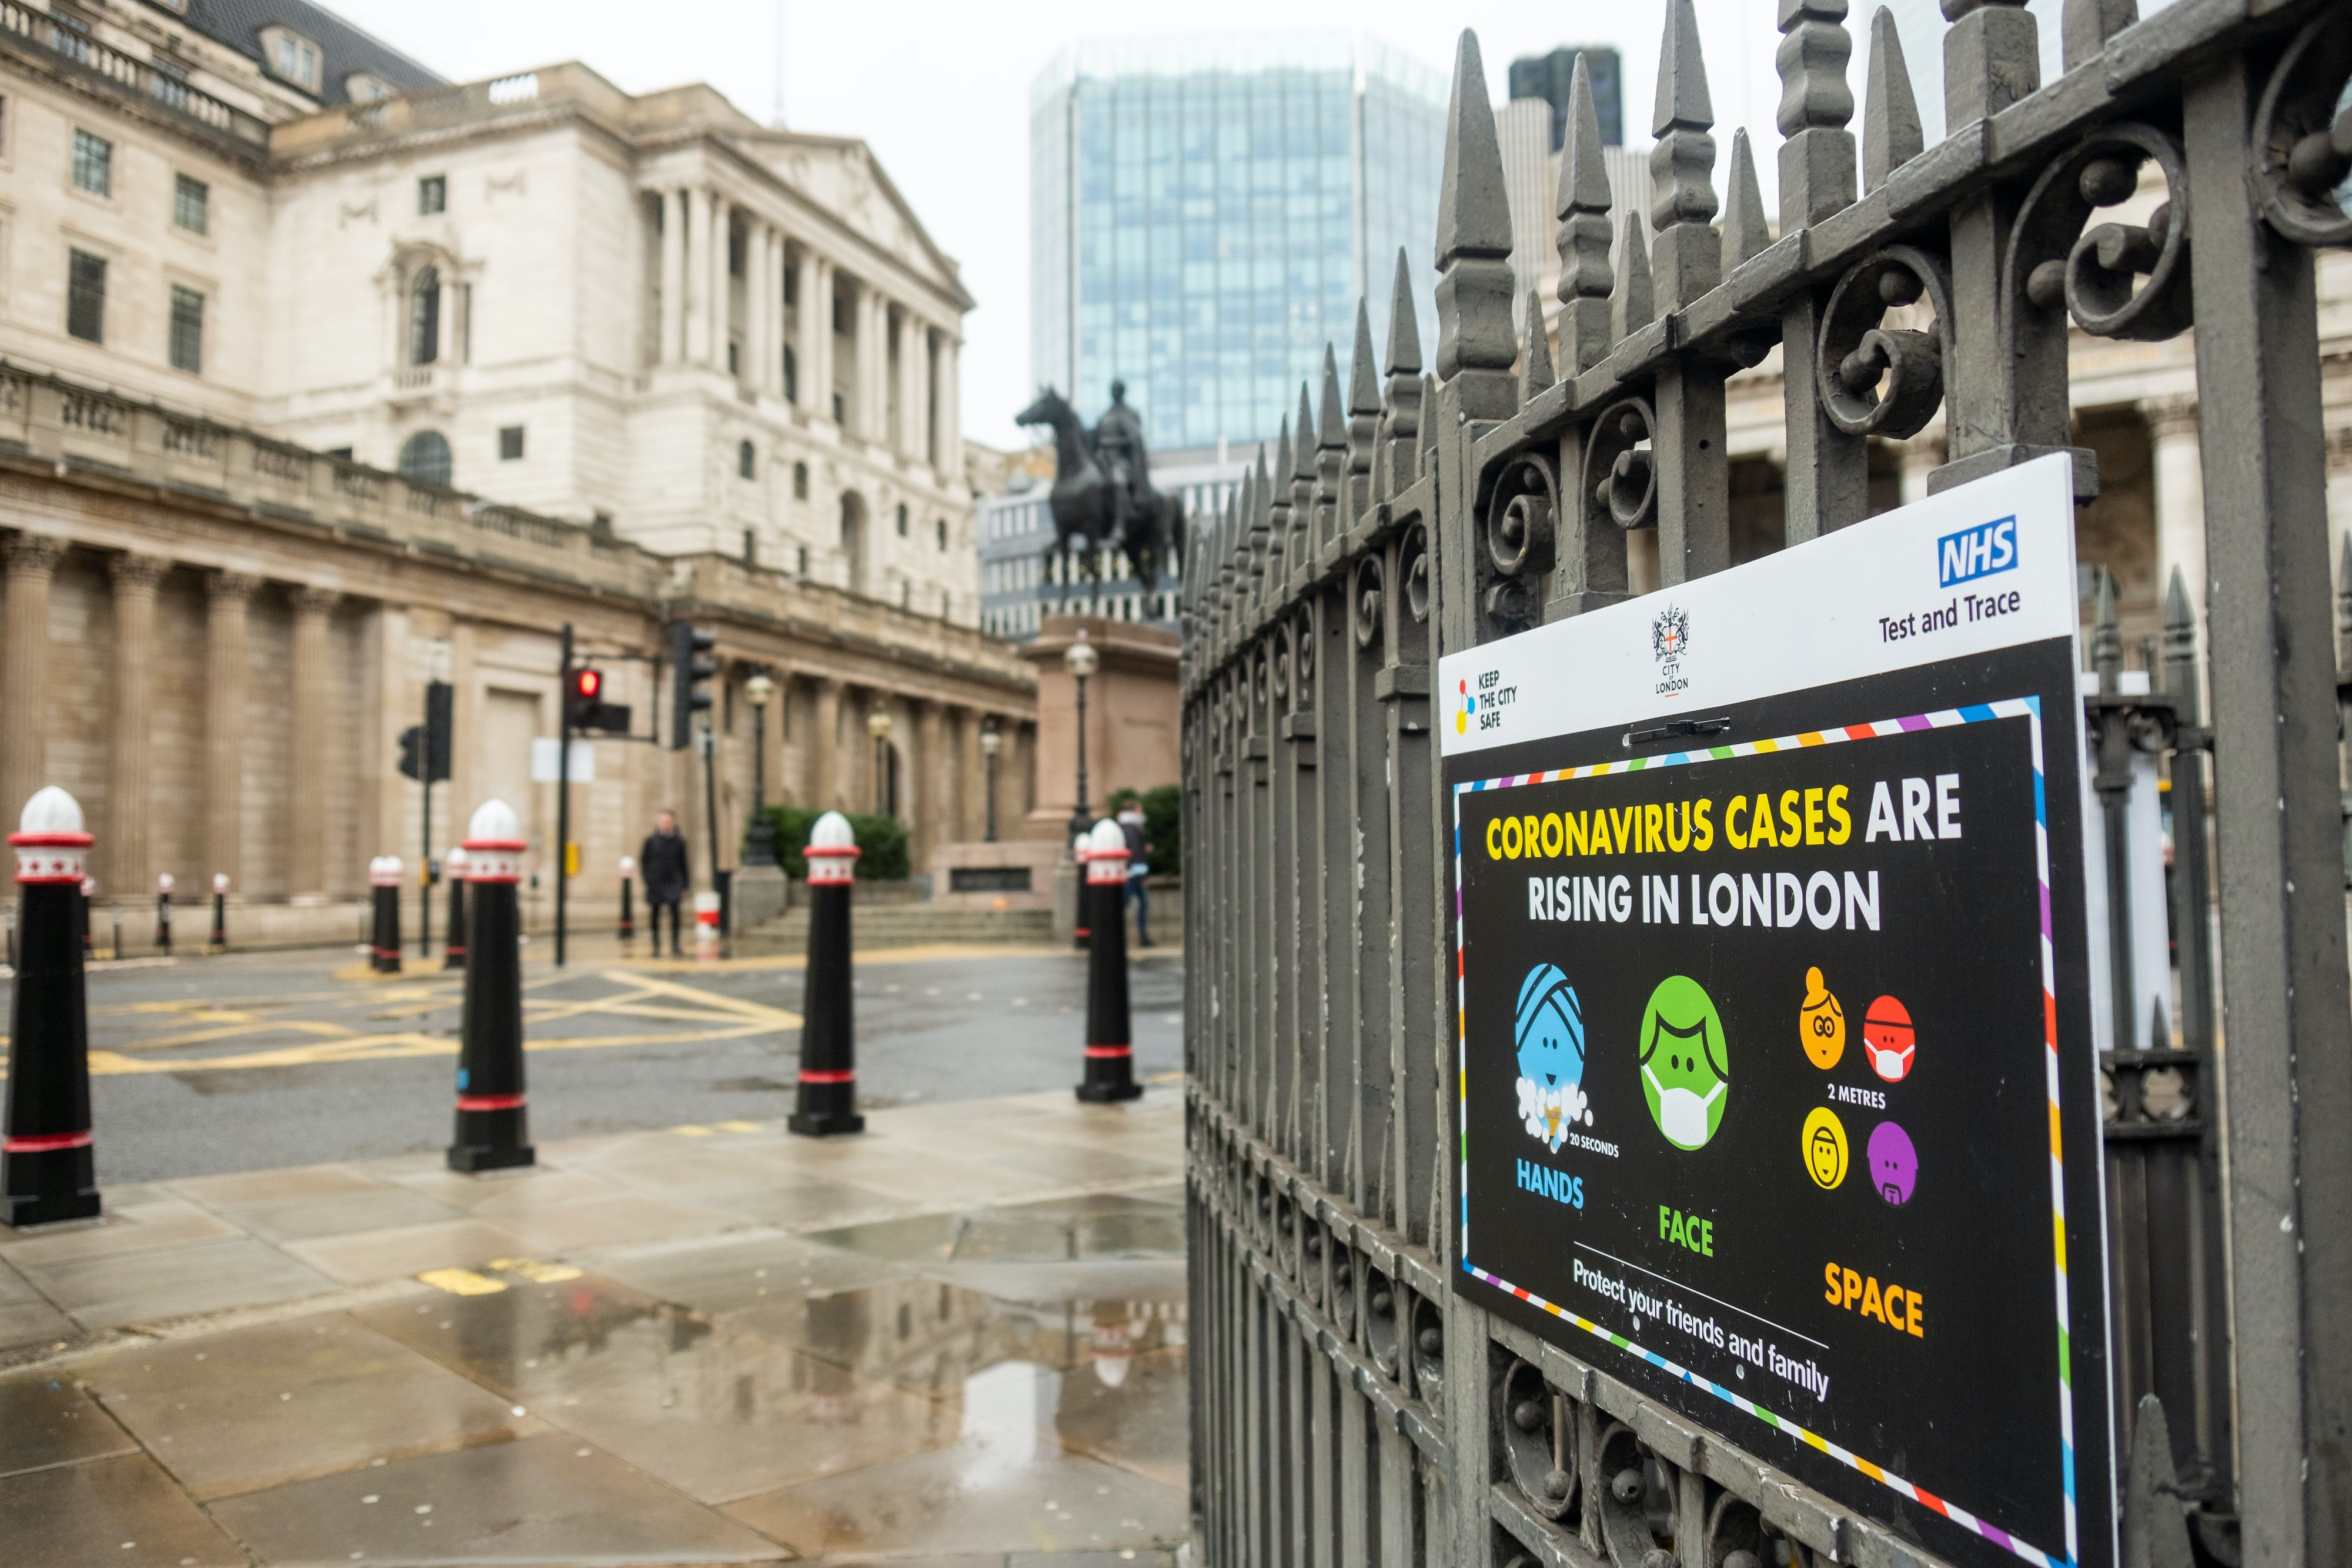 On December 21st, a sign warning of rising coronavirus cases outside the Bank Of England in days following London entering Tier 4 lockdown. Image by Willy Barton / Shutterstock. United Kingdom, 2020.